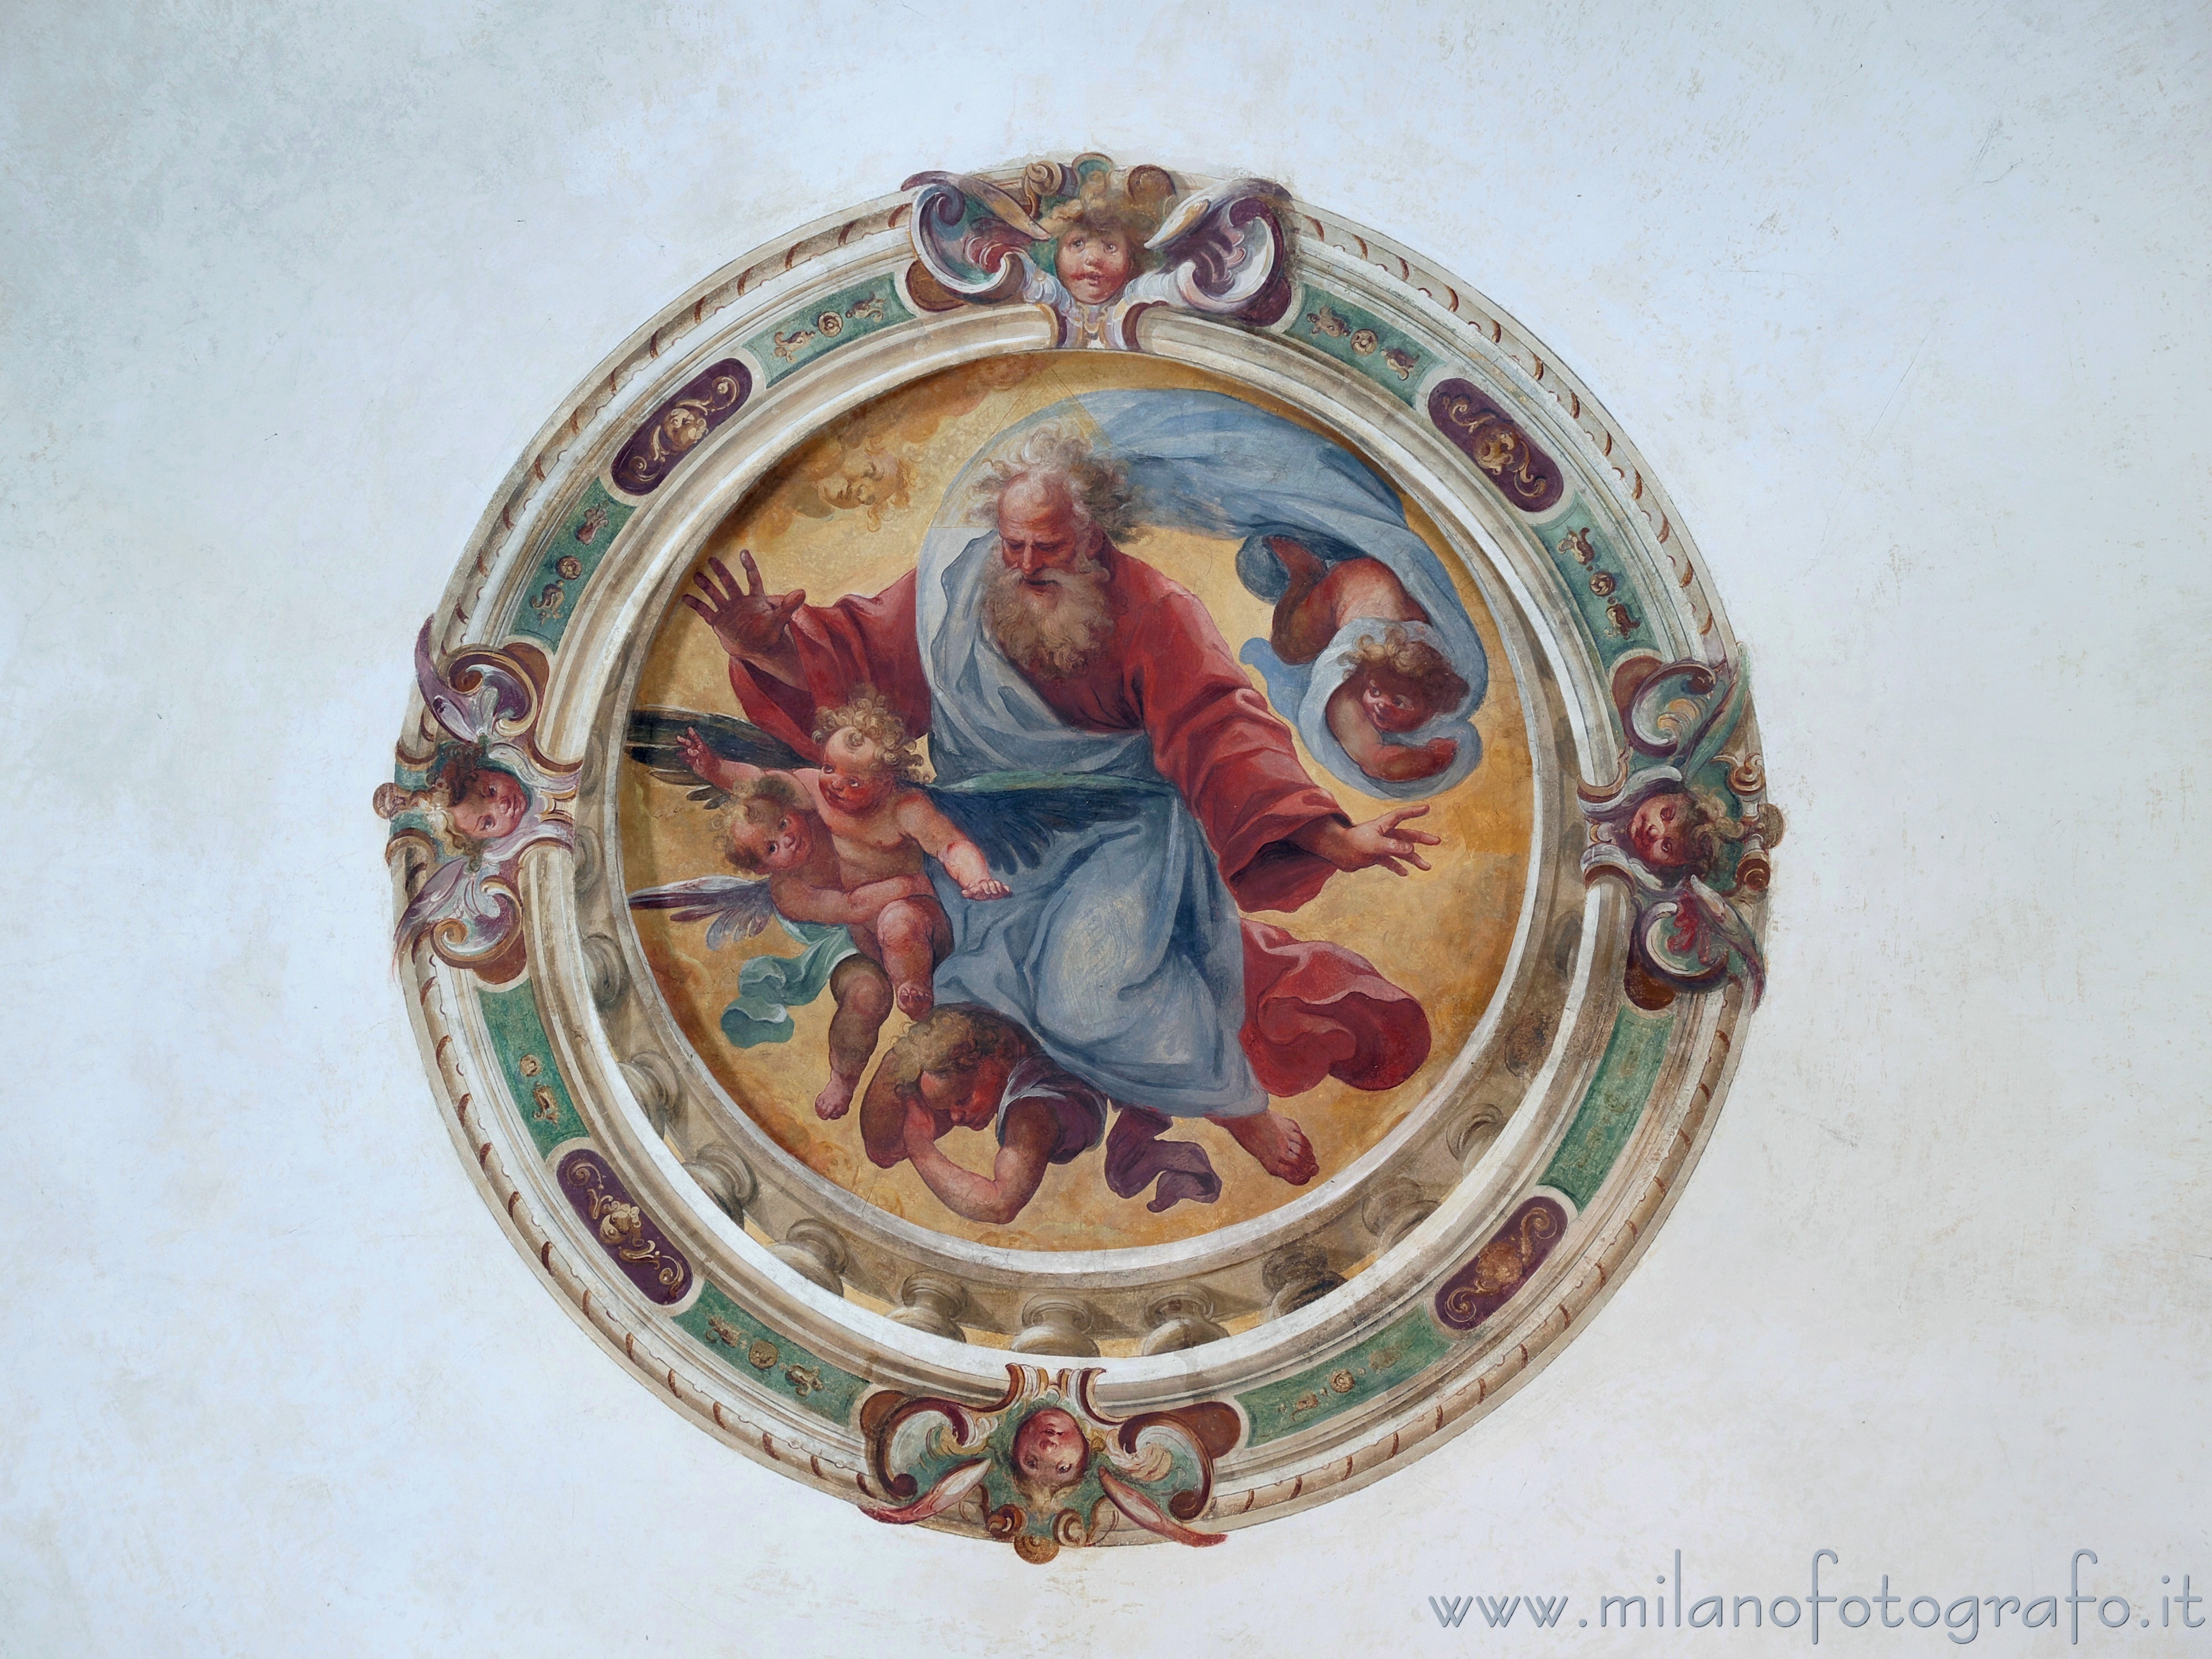 Sesto San Giovanni (Milan, Italy): God the Father blessing in the Oratory of Santa Margherita in Villa Torretta - Sesto San Giovanni (Milan, Italy)